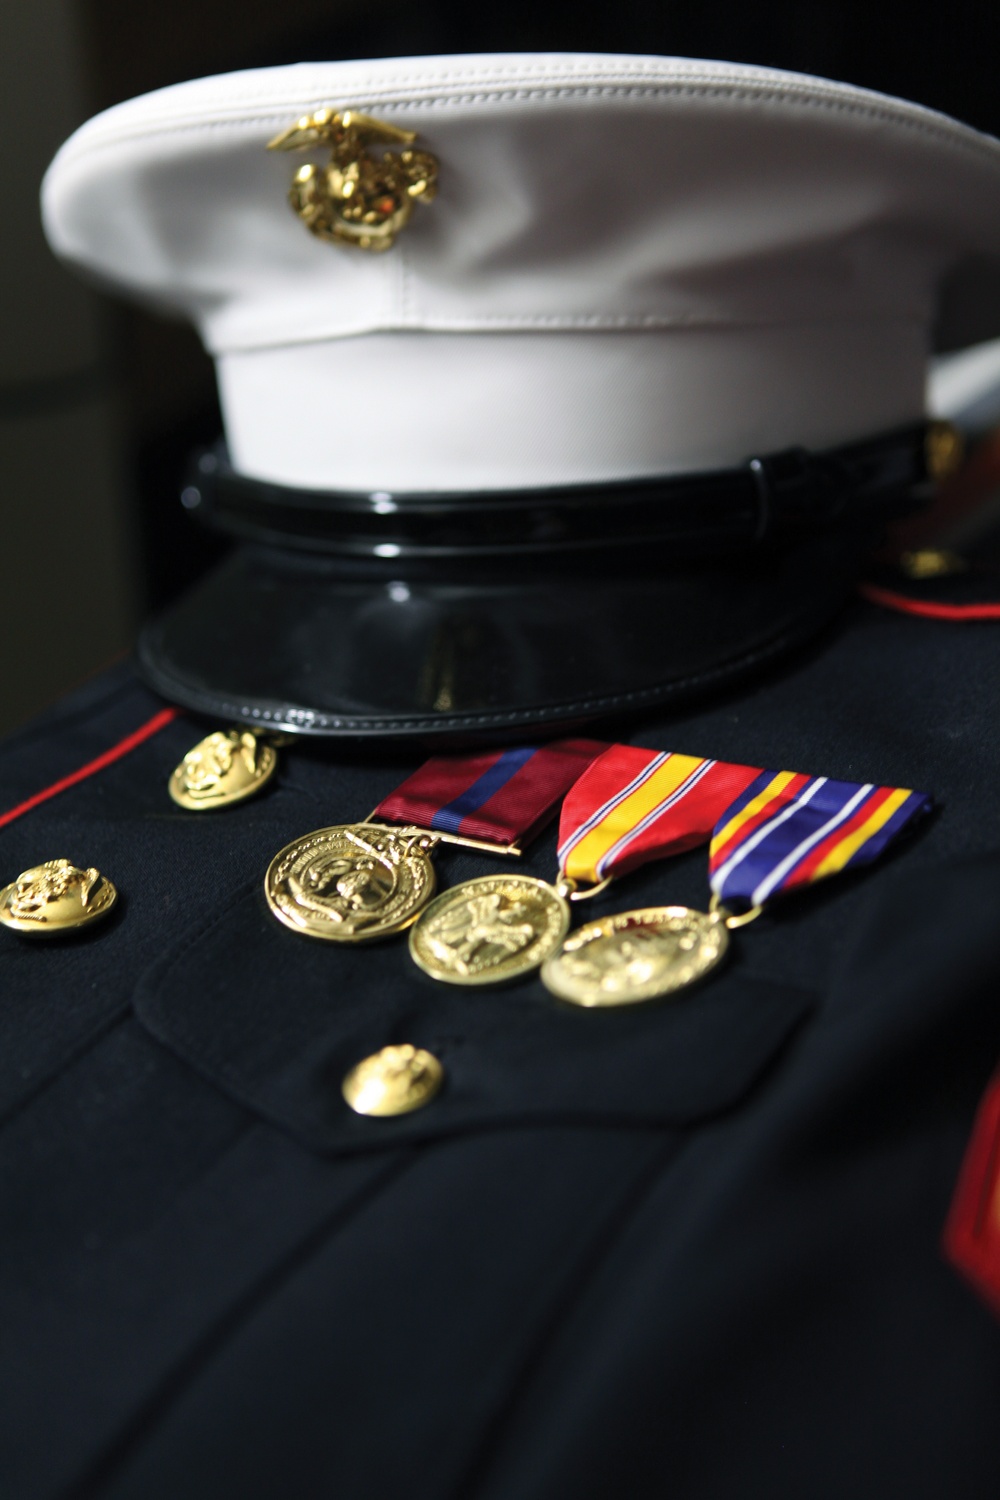 marine corps dress blues a style guide sofrep on dress blue alphas consist of